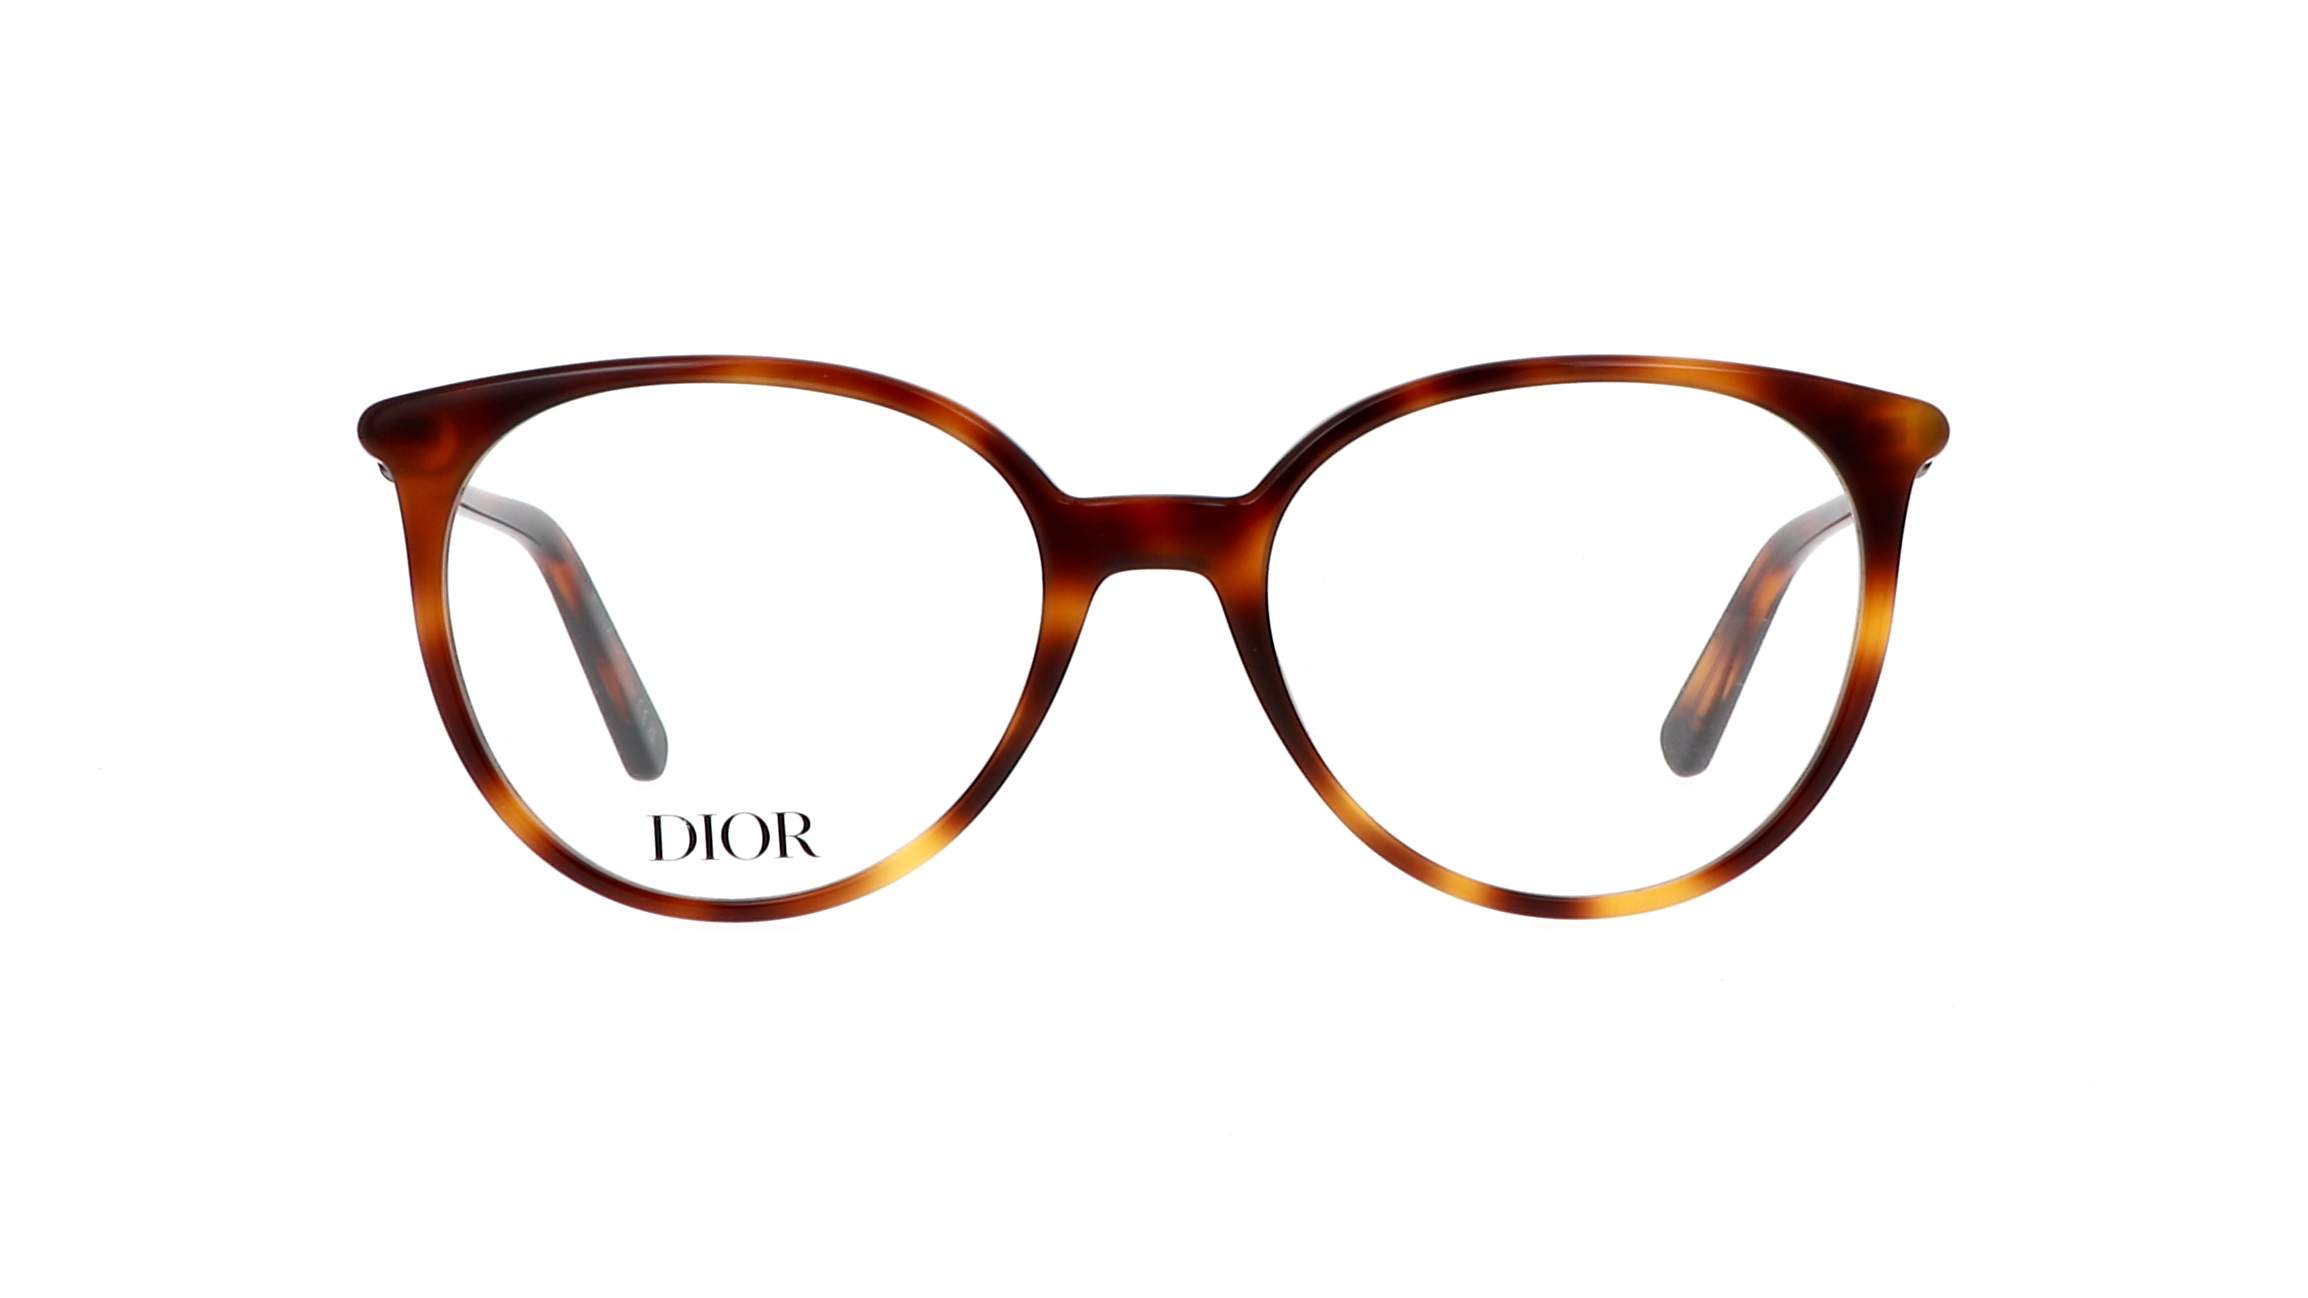 Learn about the history of Christian Dior glasses and how to buy them online